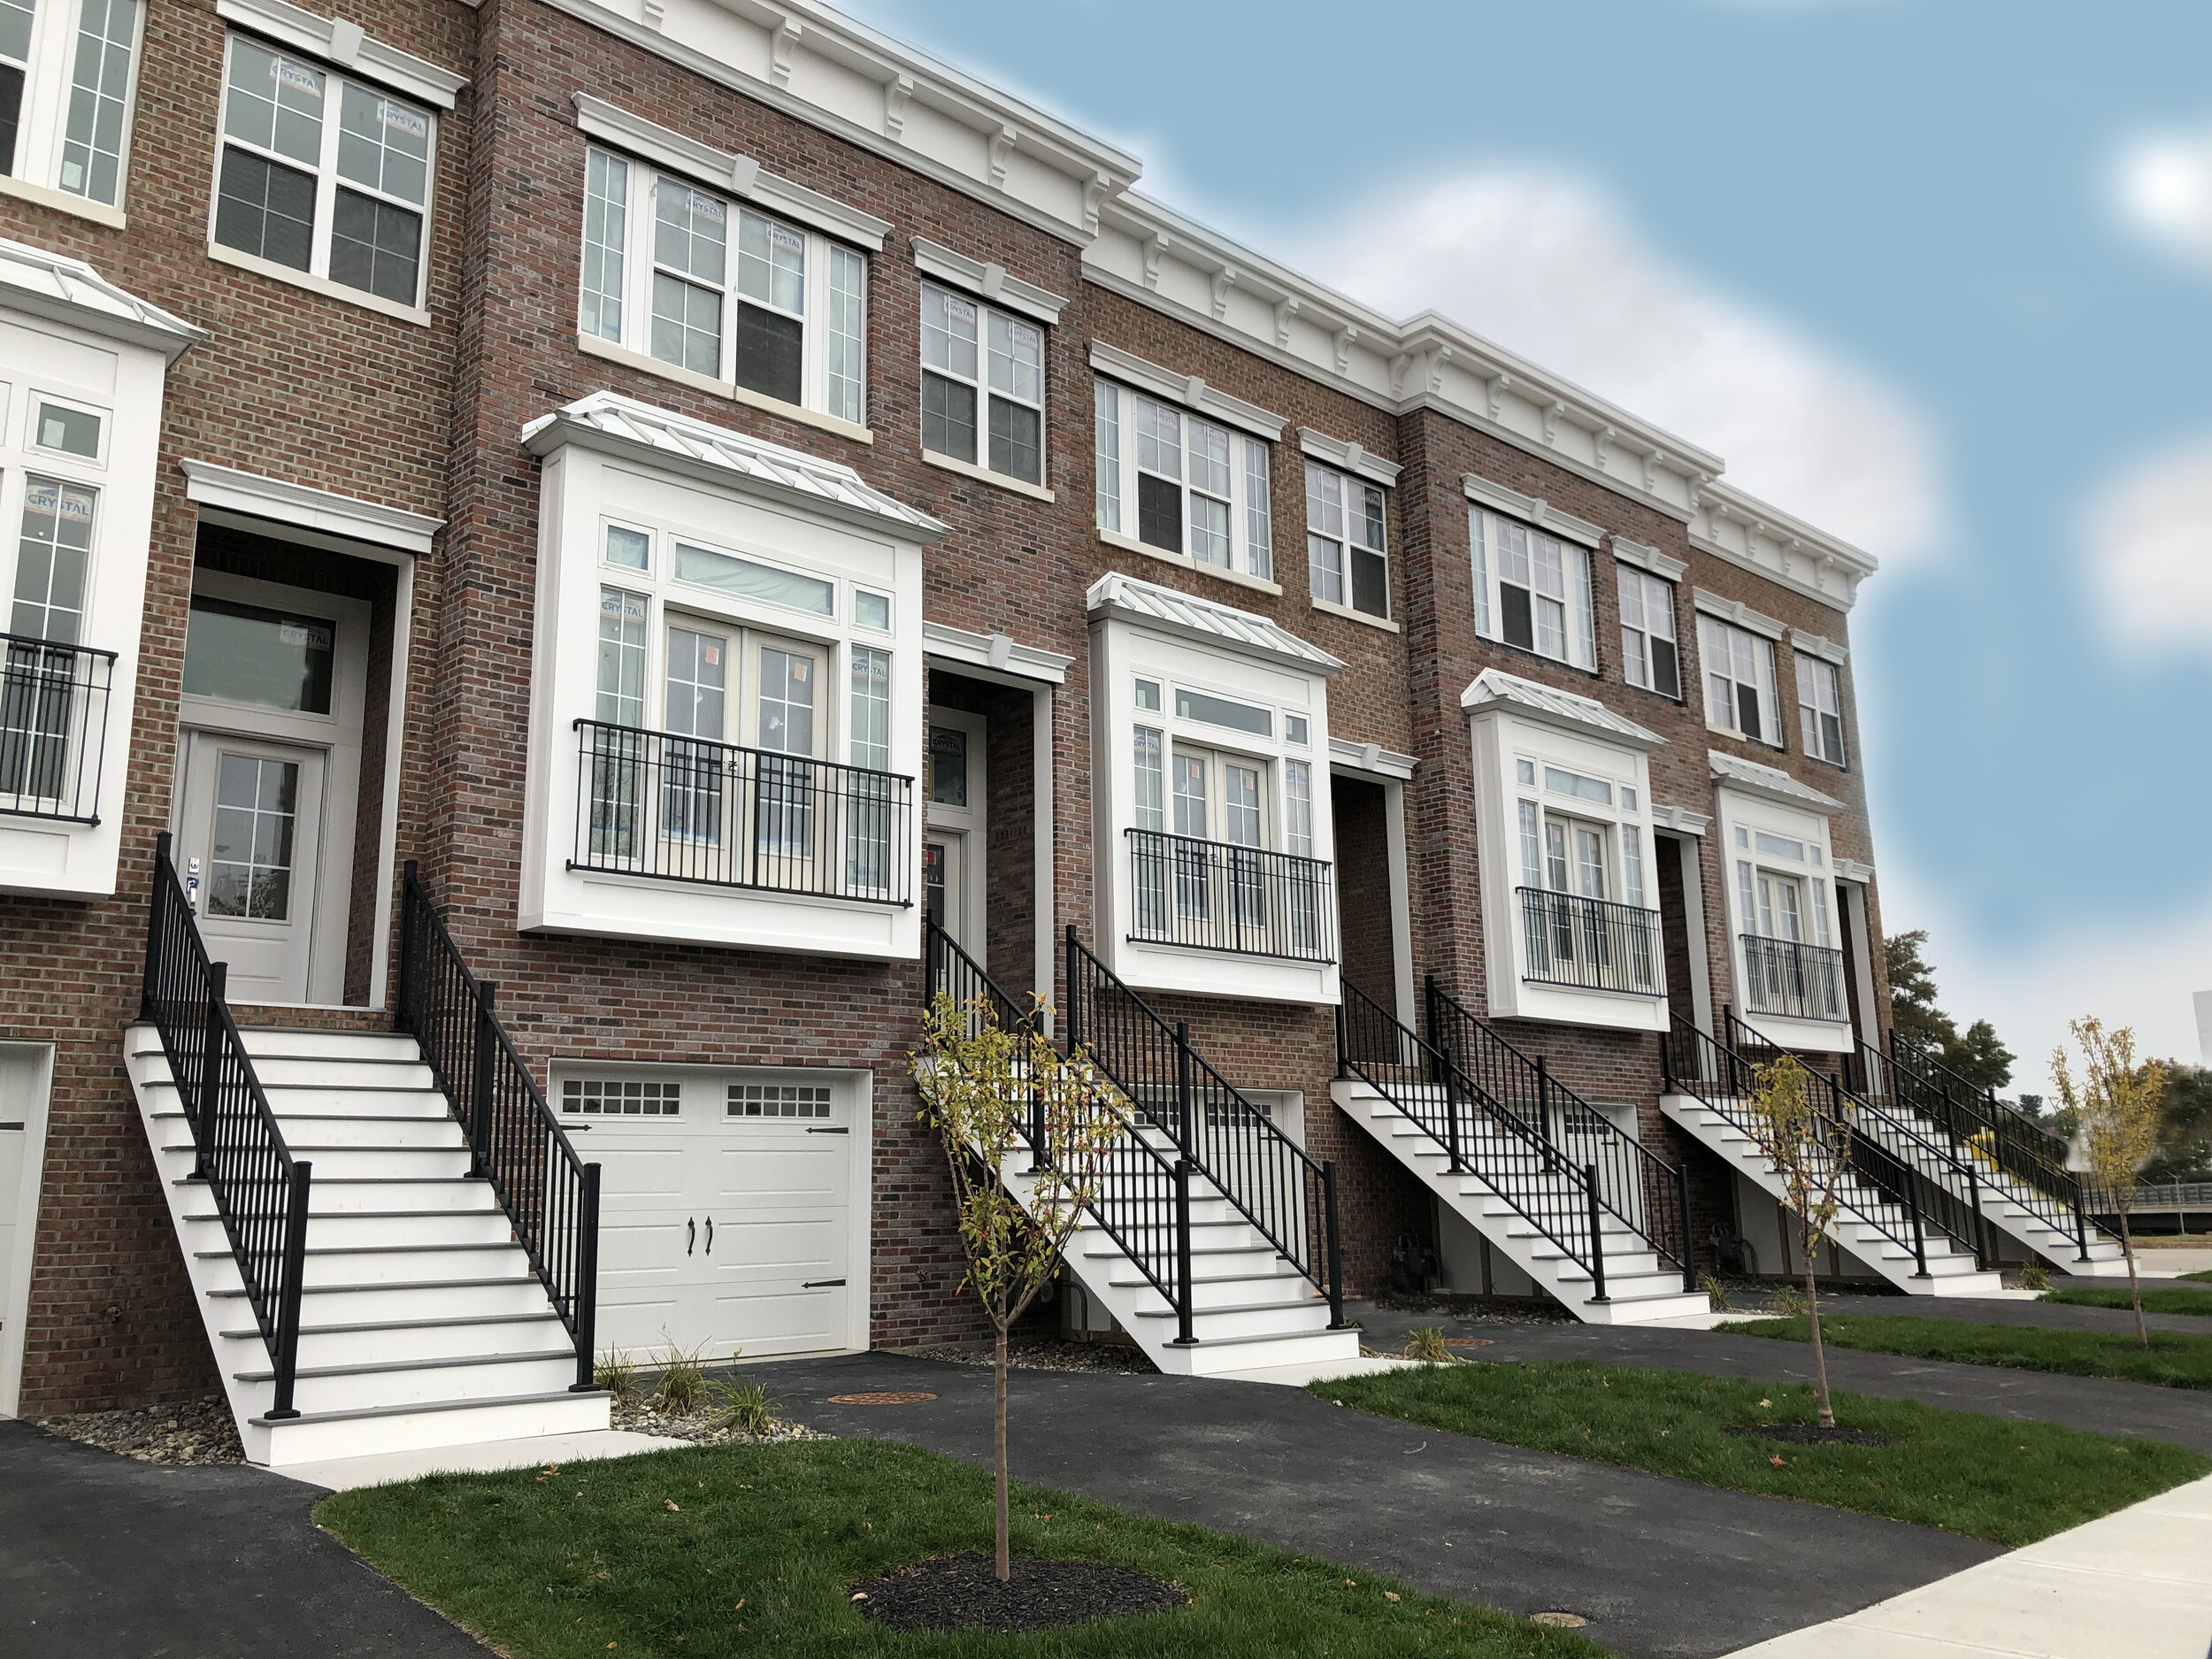 Townhomes on belvidere built by jankow companies